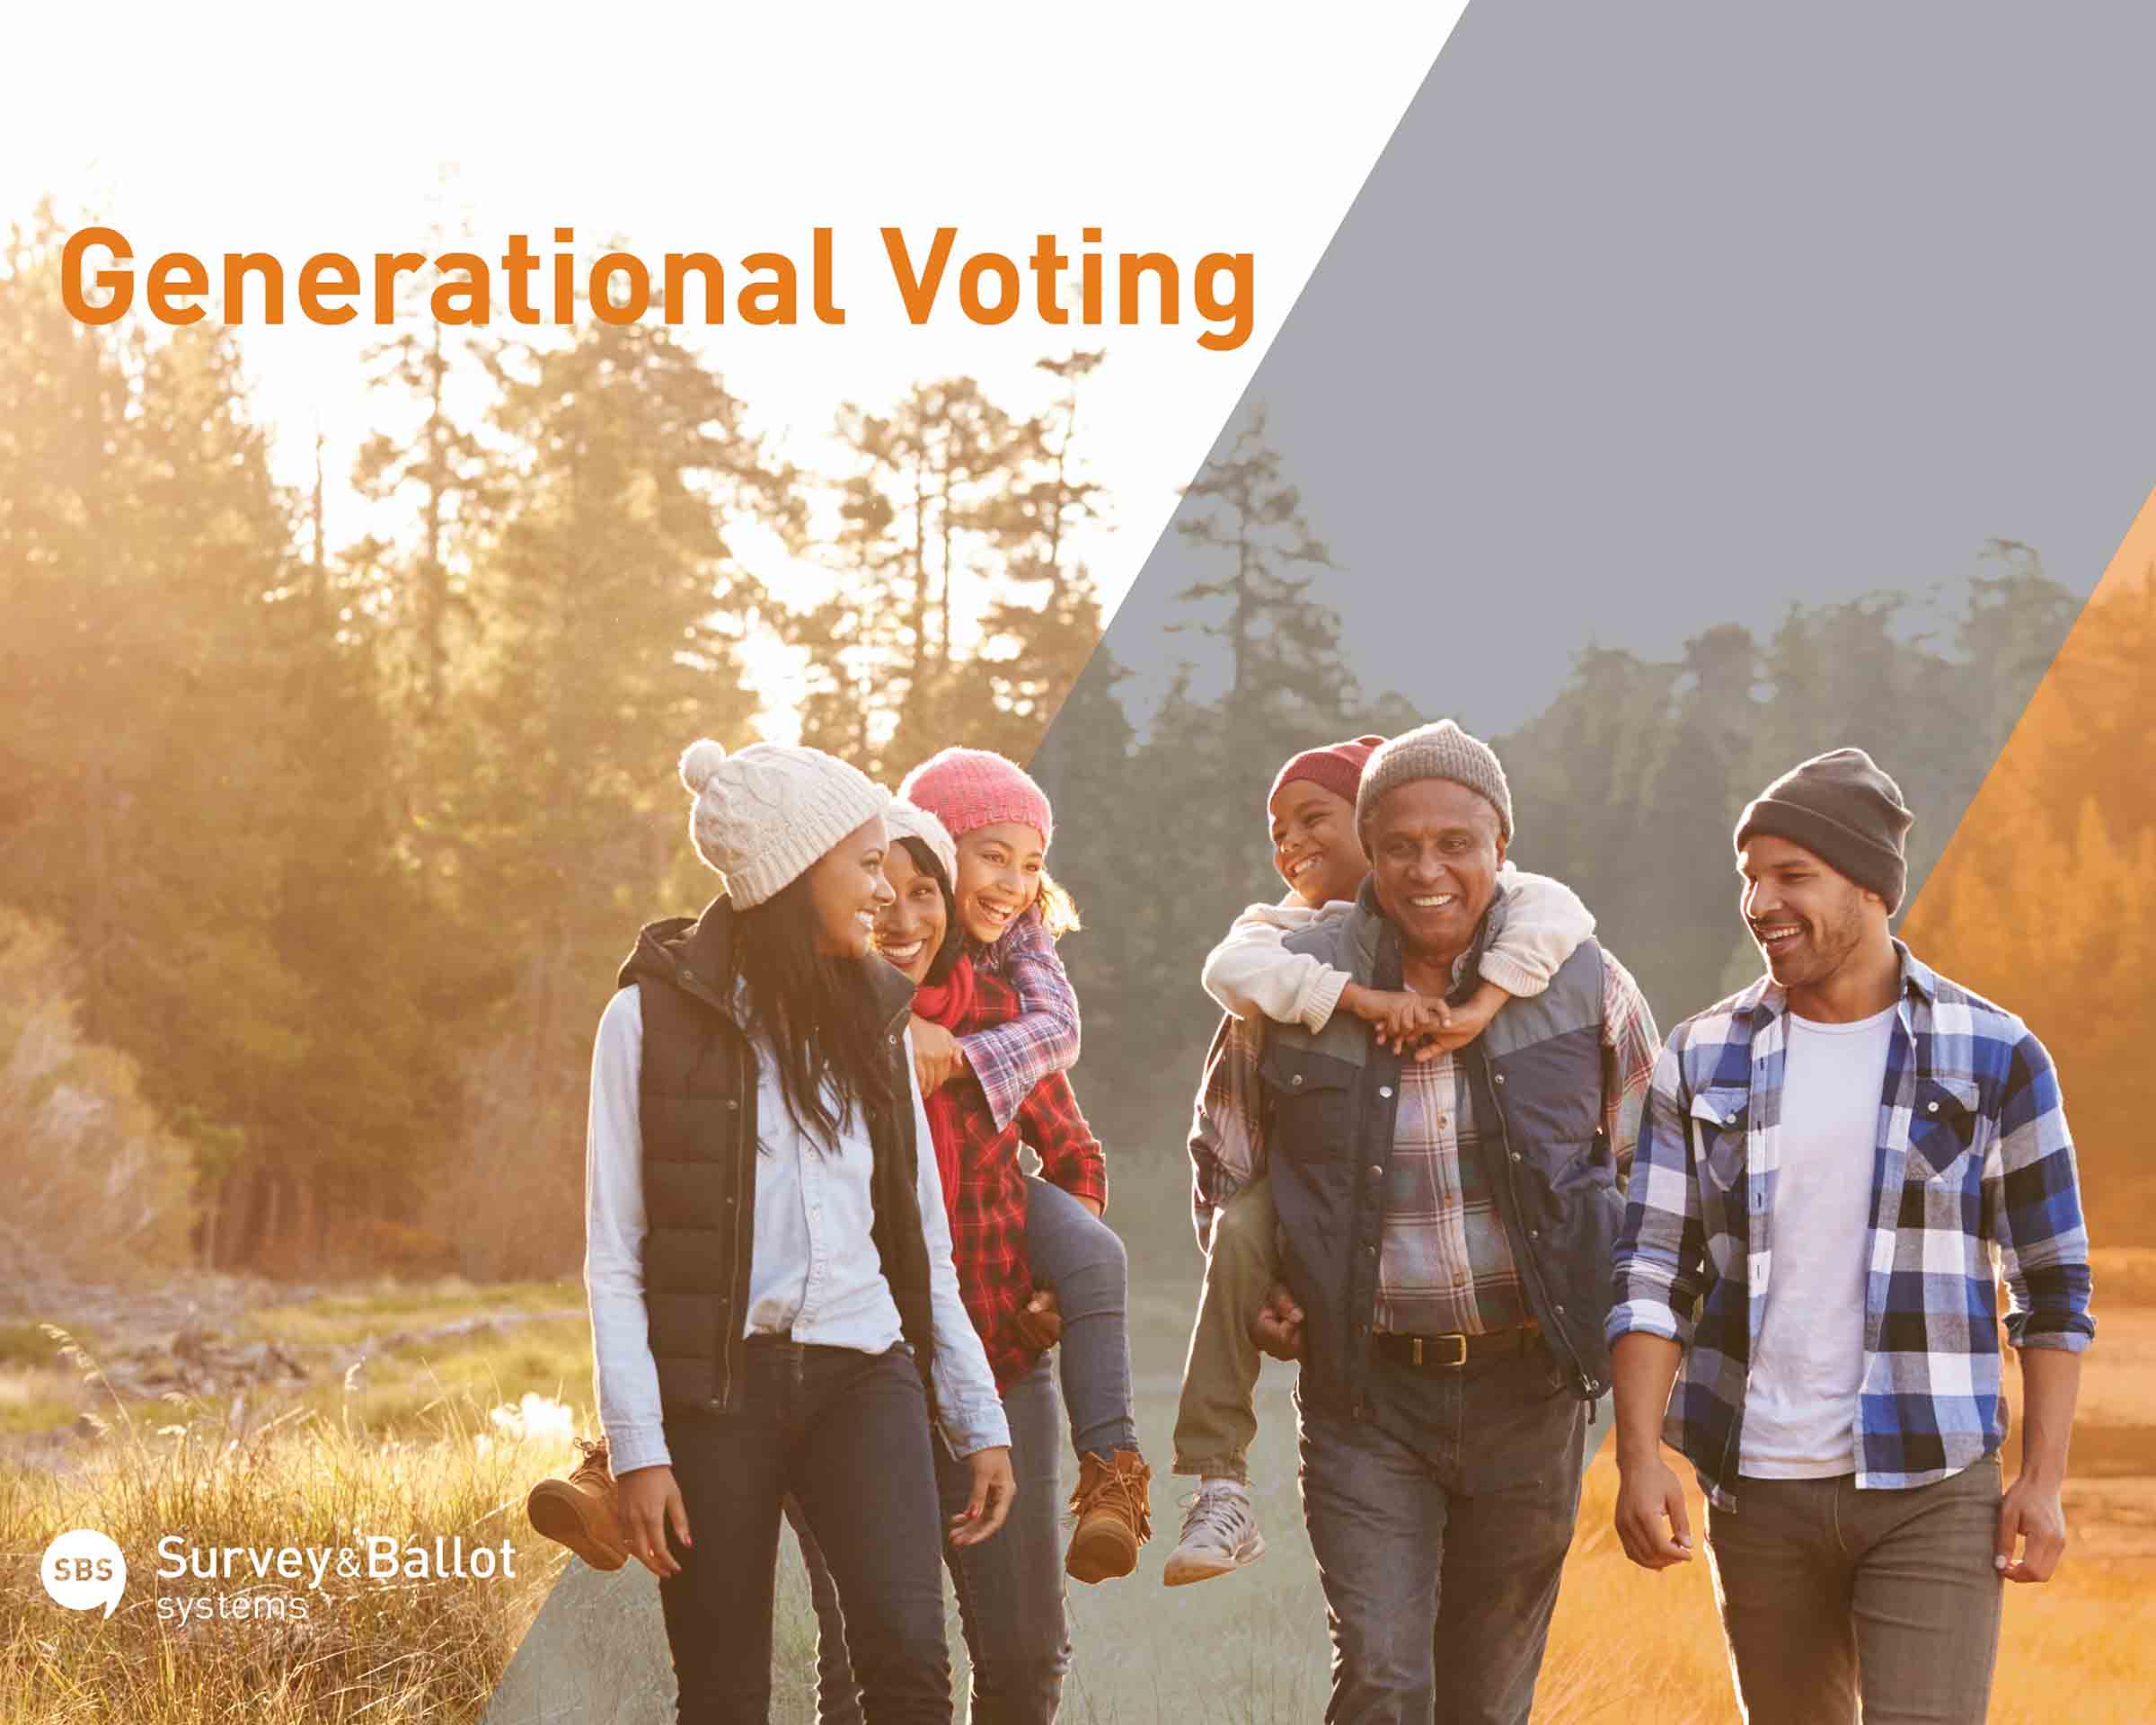 a poster for generational voting shows a family walking through a field